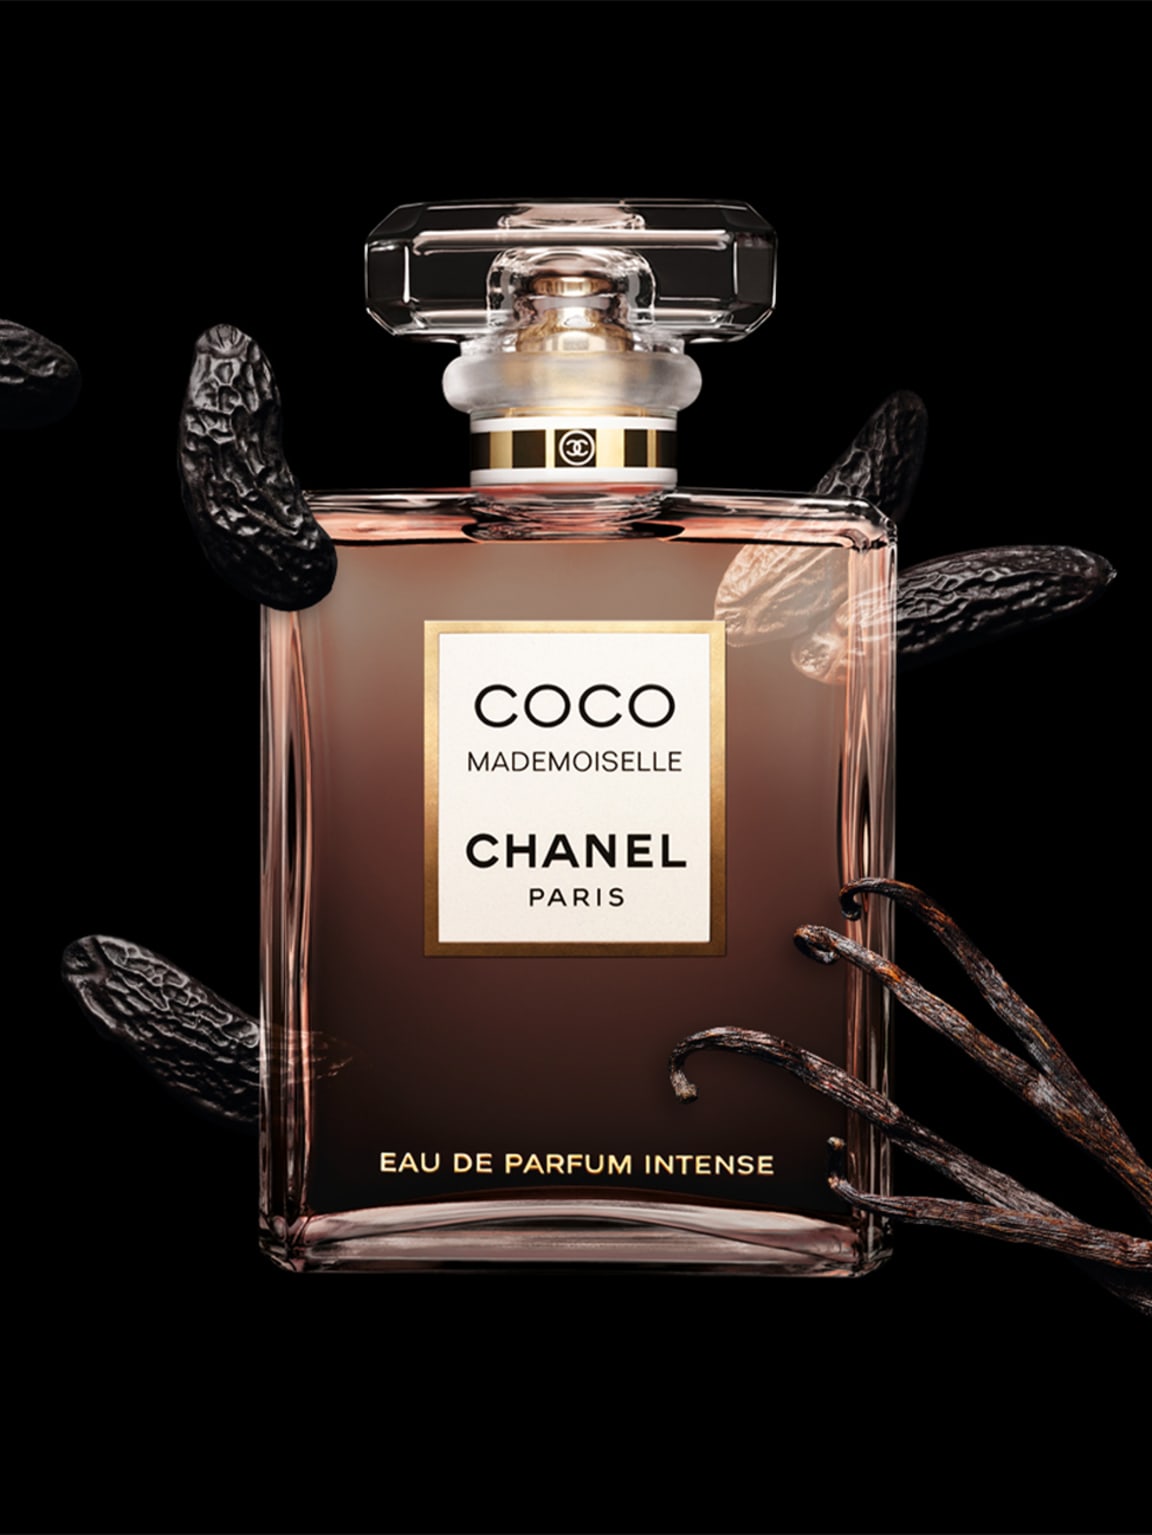 Chanel Coco Mademoiselle Intense For Women 100ml